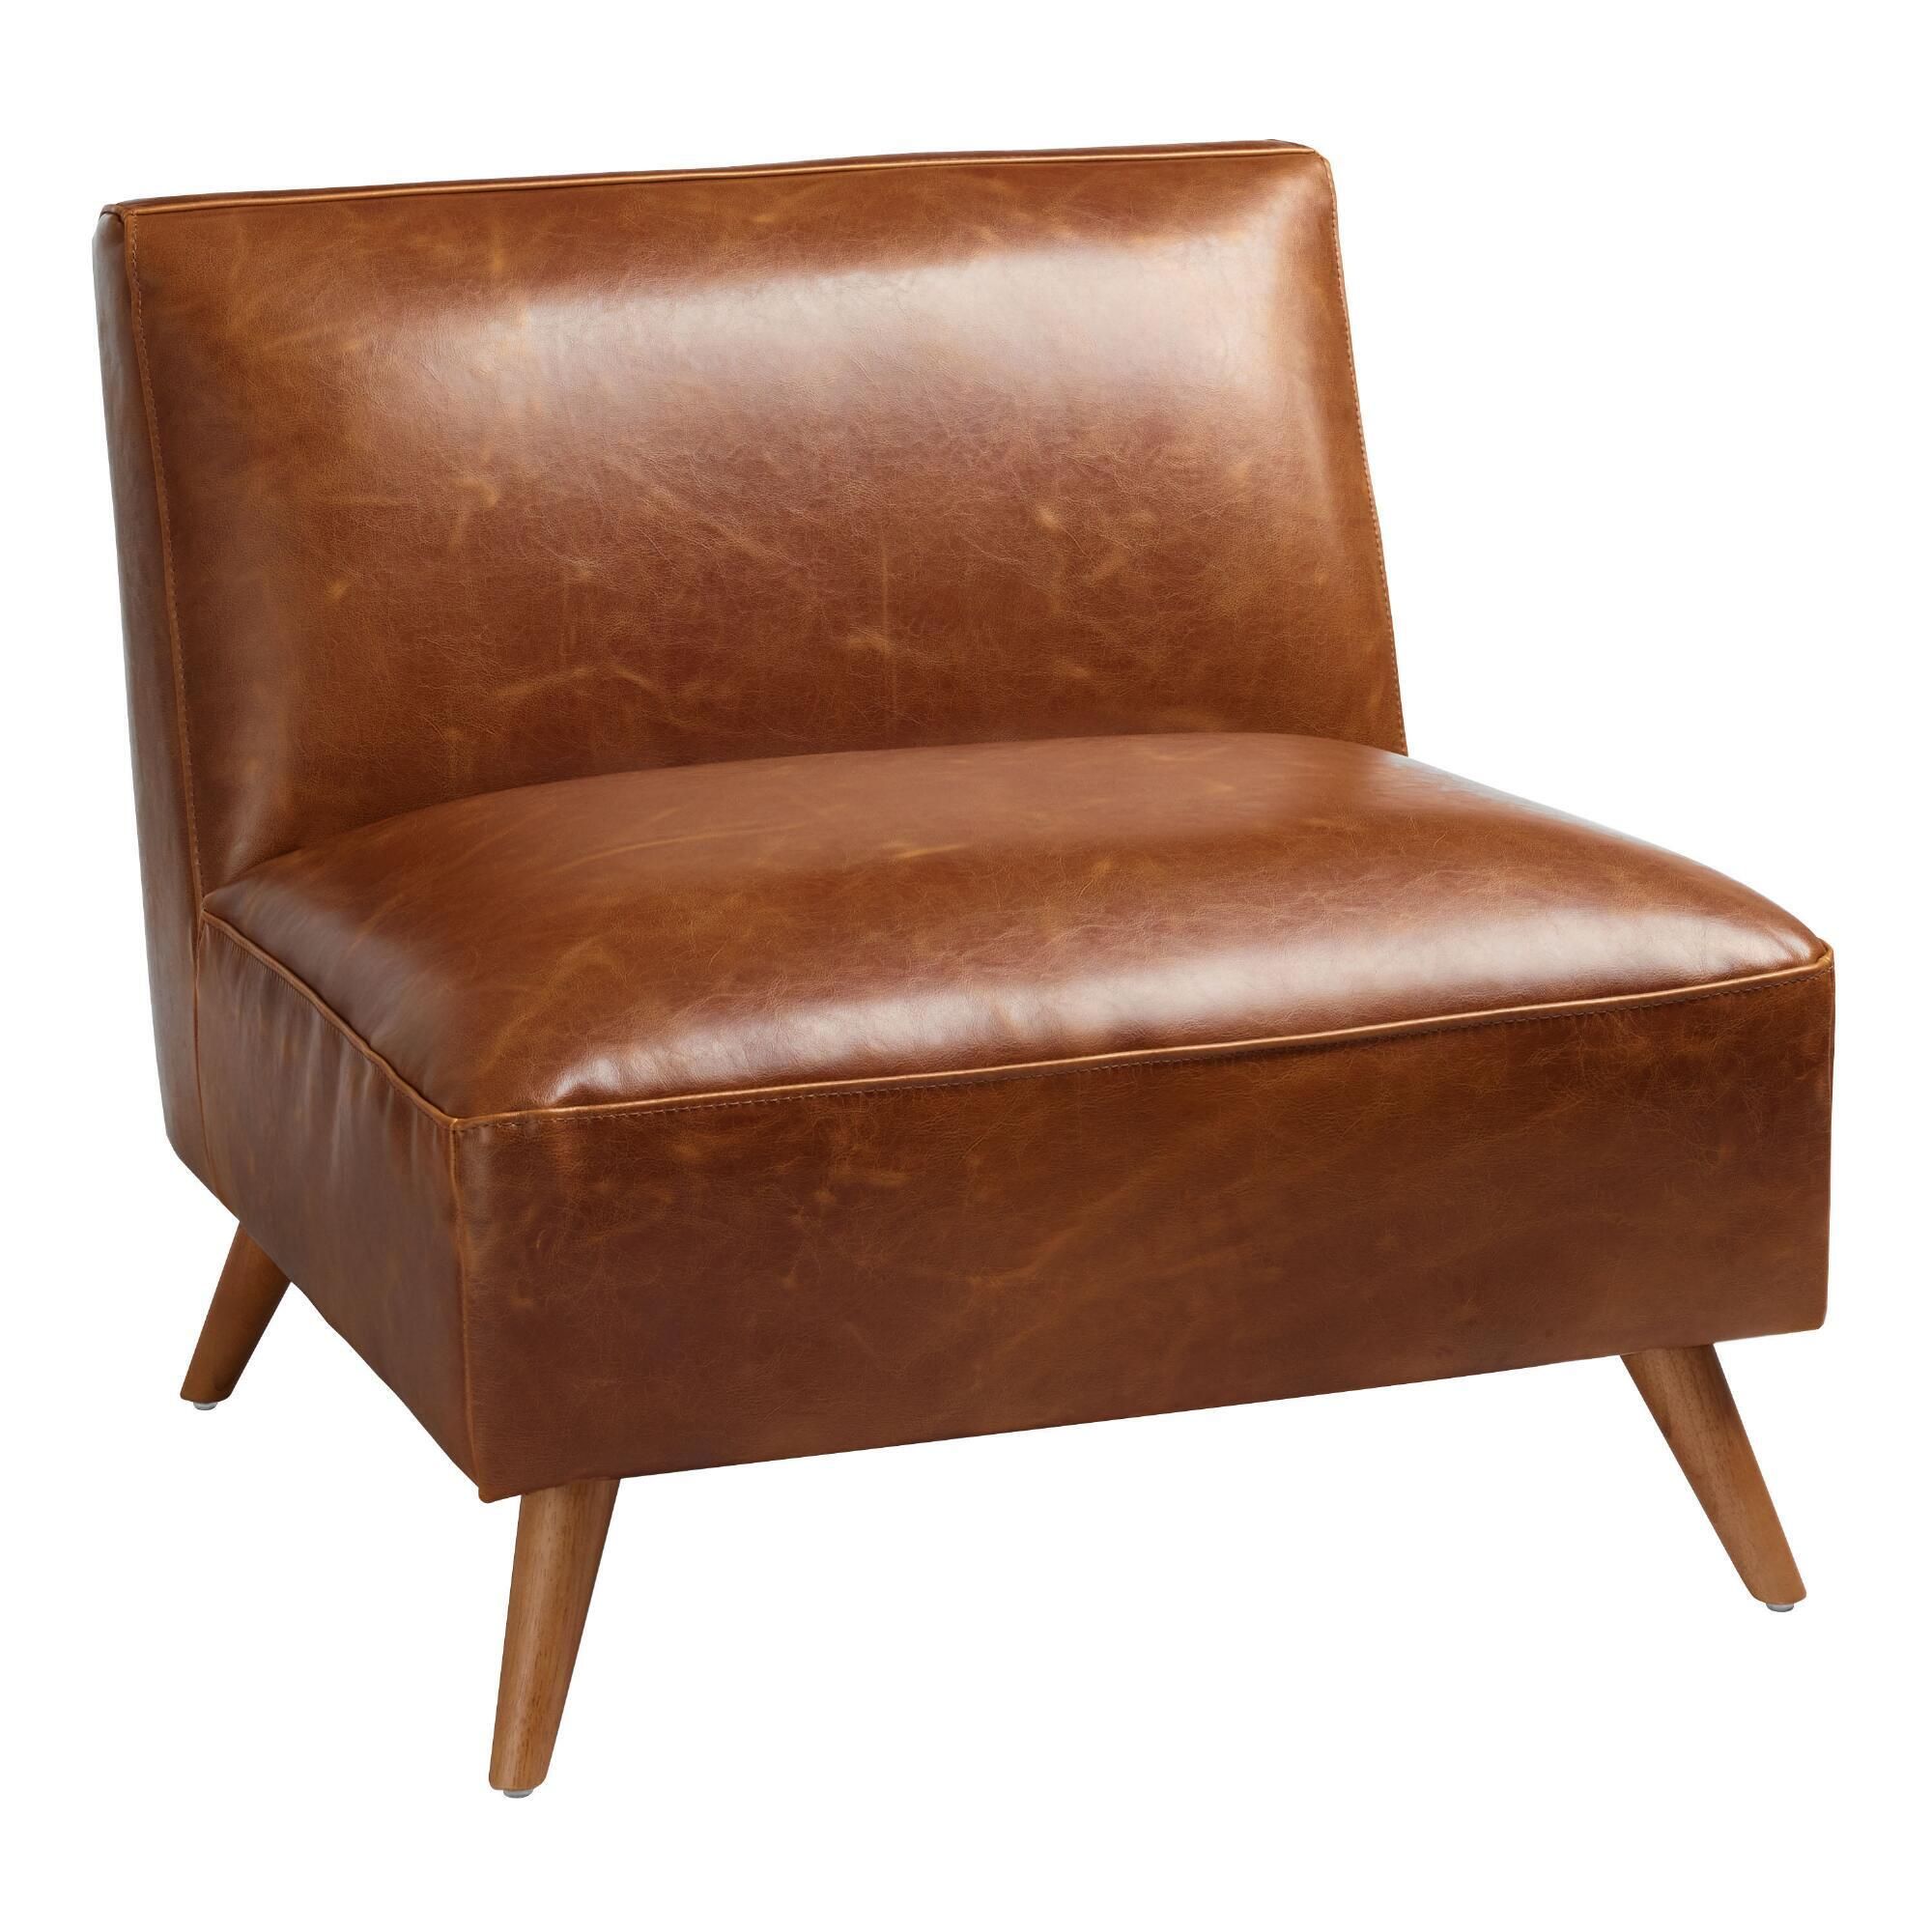 Mid Century Armless Huxley Chair: Brown - Leather - Cognac by World Market | World Market